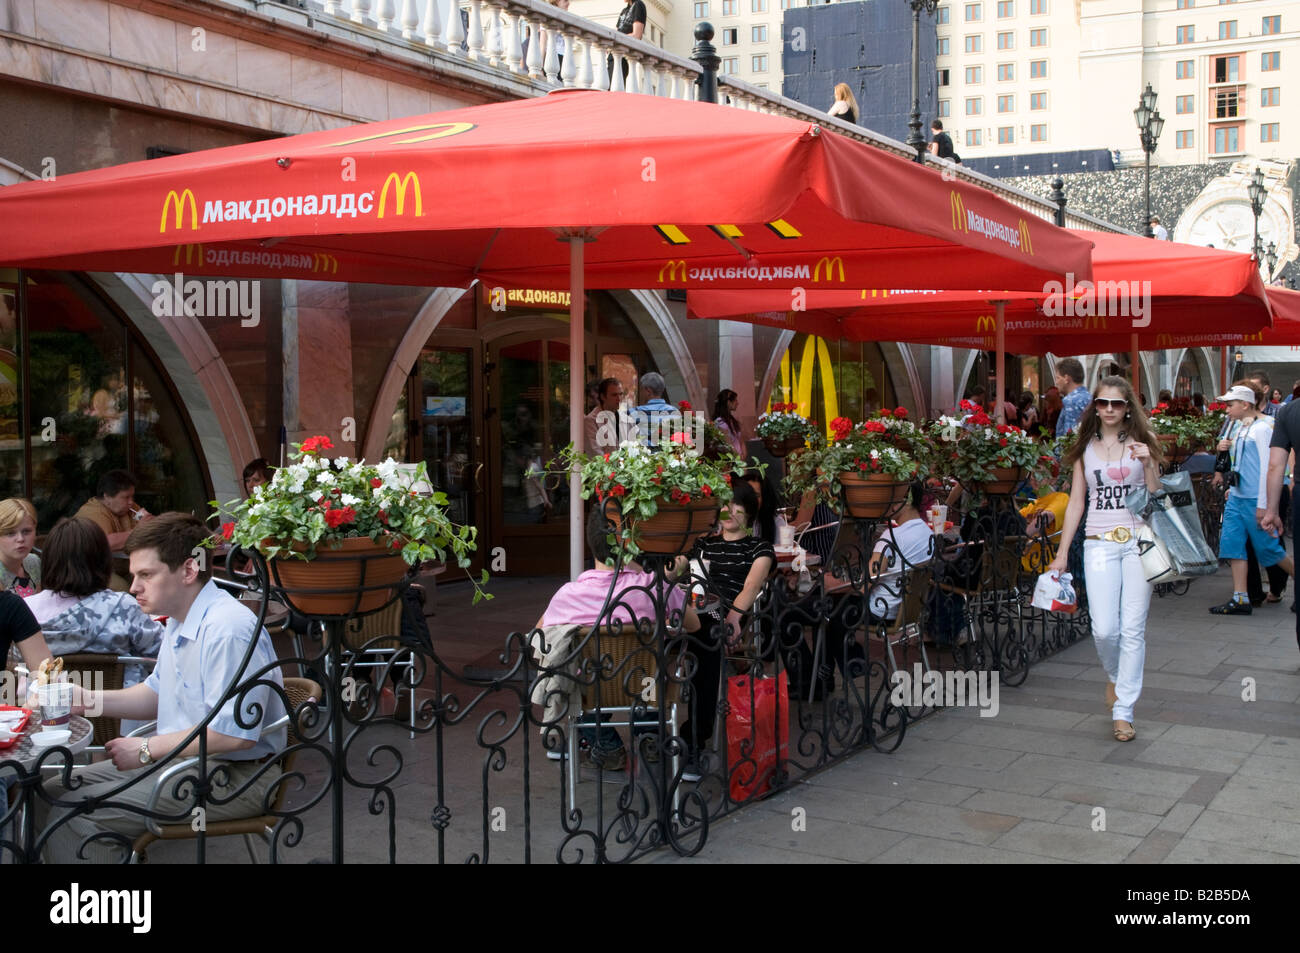 People at a McDonald's restaurant, Moscow, Russia Stock Photo